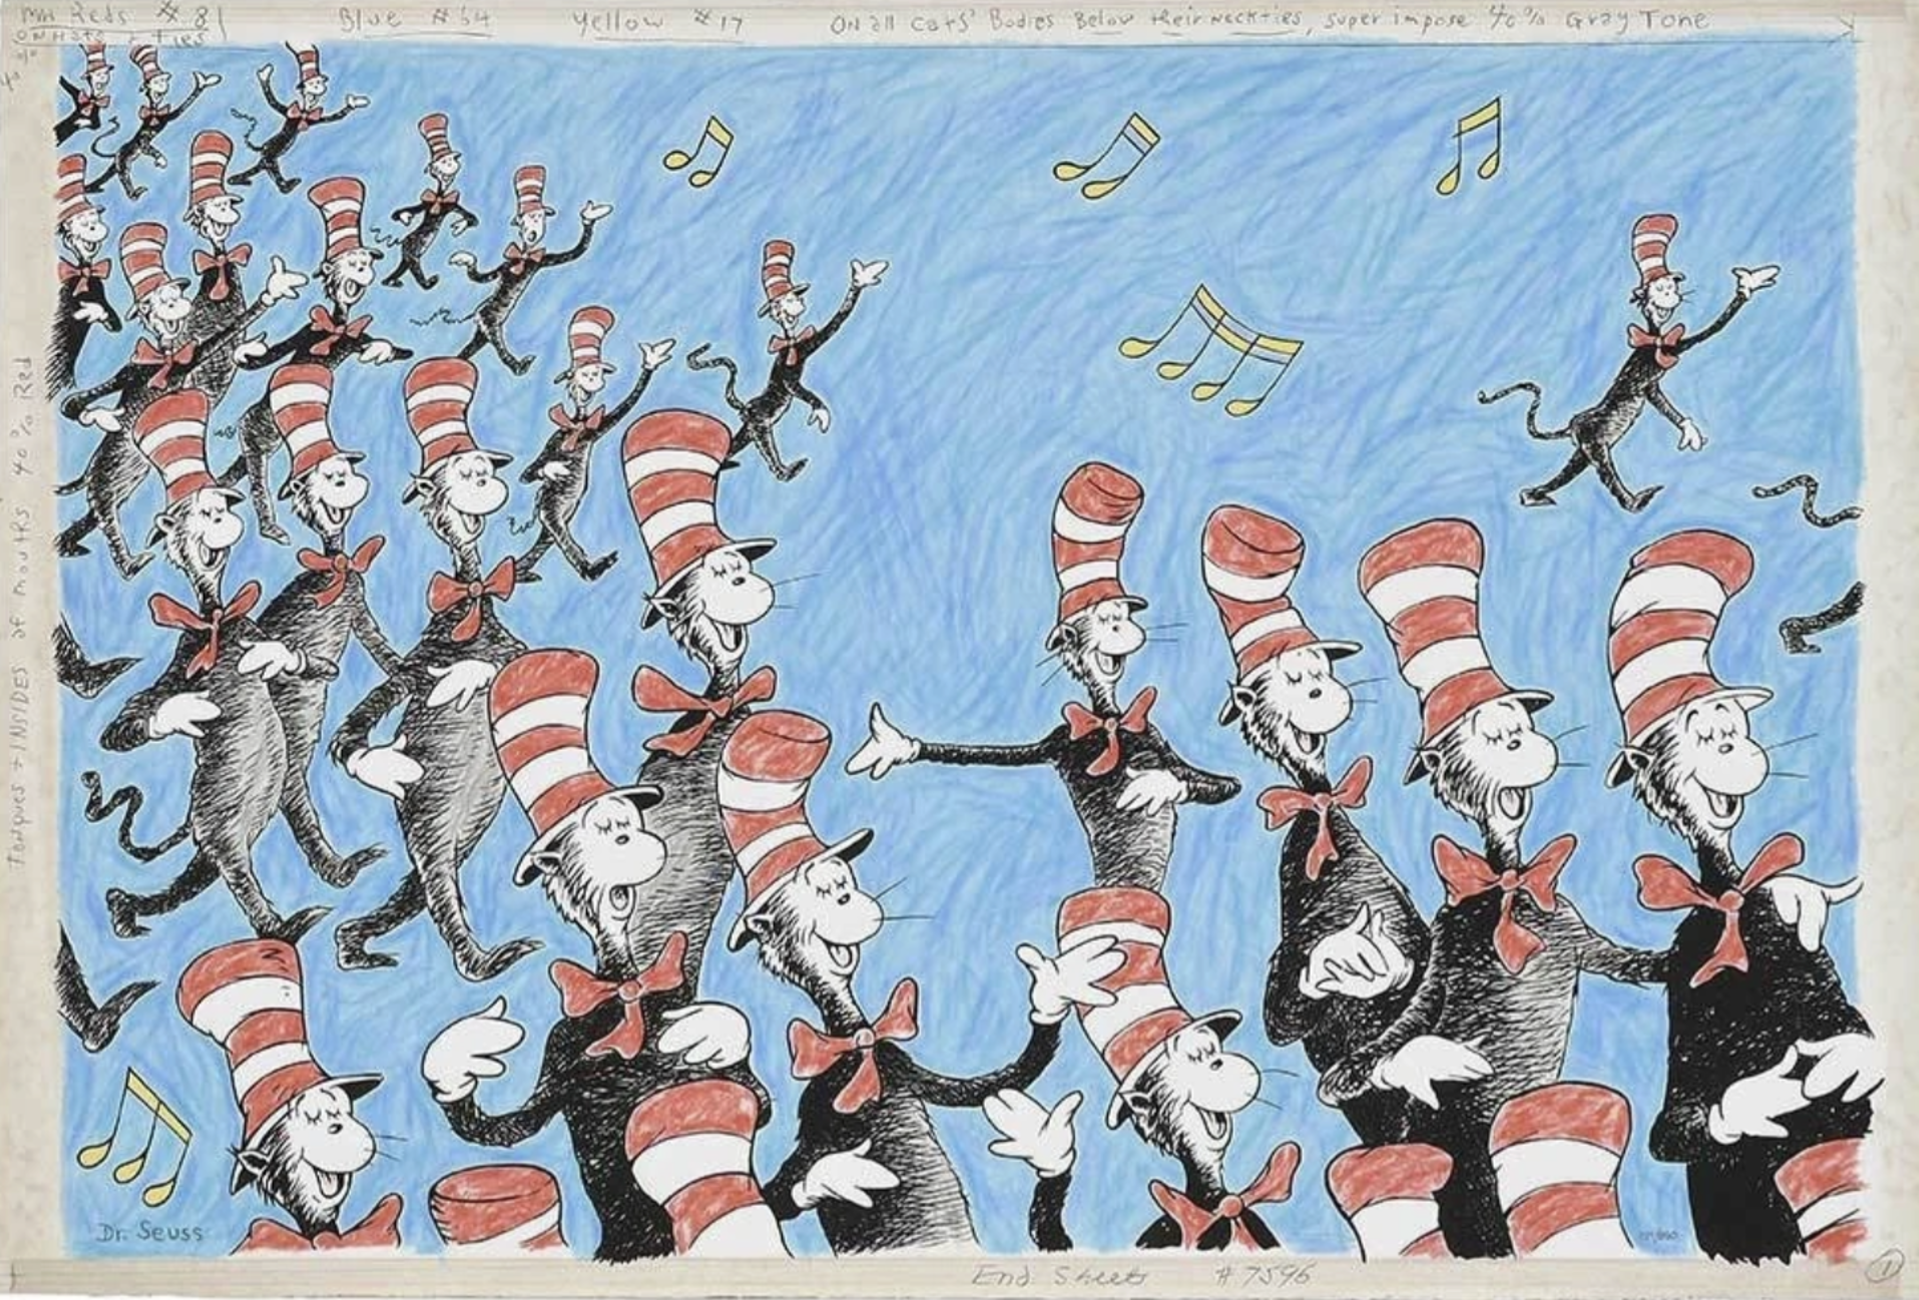 Singing Cats by Dr. Seuss